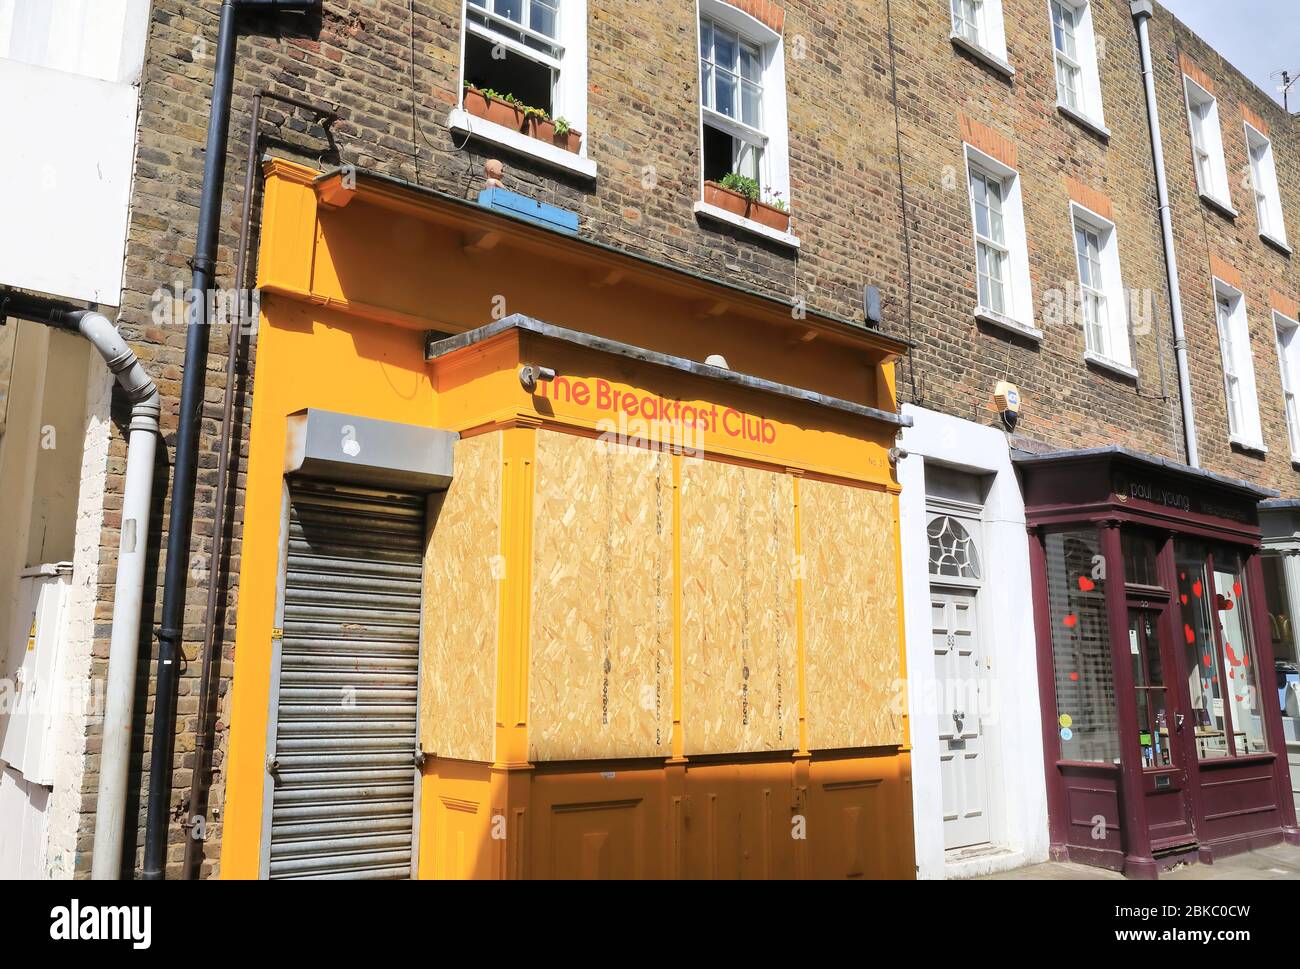 The usually popular Breakfast Club cafe on Camden Passage, boarded up, in Islington, north London, boarded up during the coronavirus pandemic lockdown, UK Stock Photo